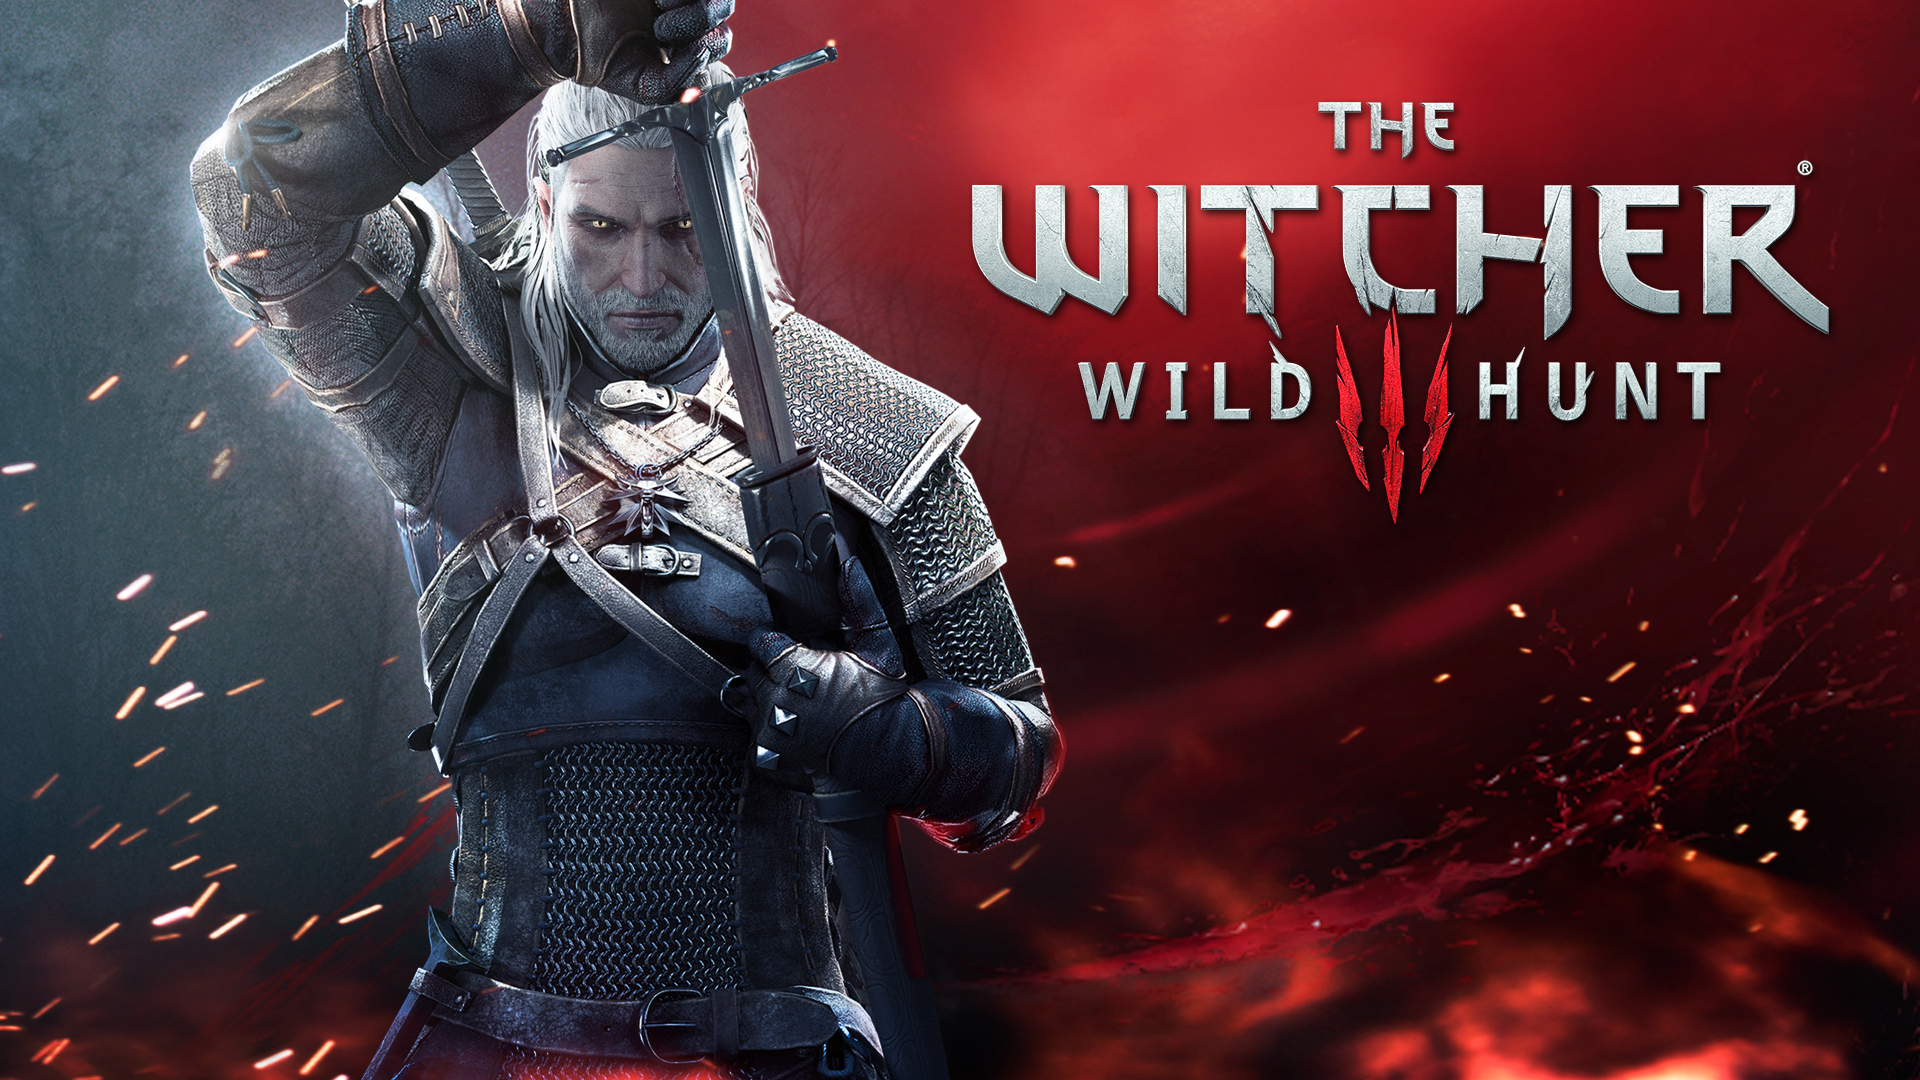 [48+] The Witcher 3 1080p Wallpaper on WallpaperSafari